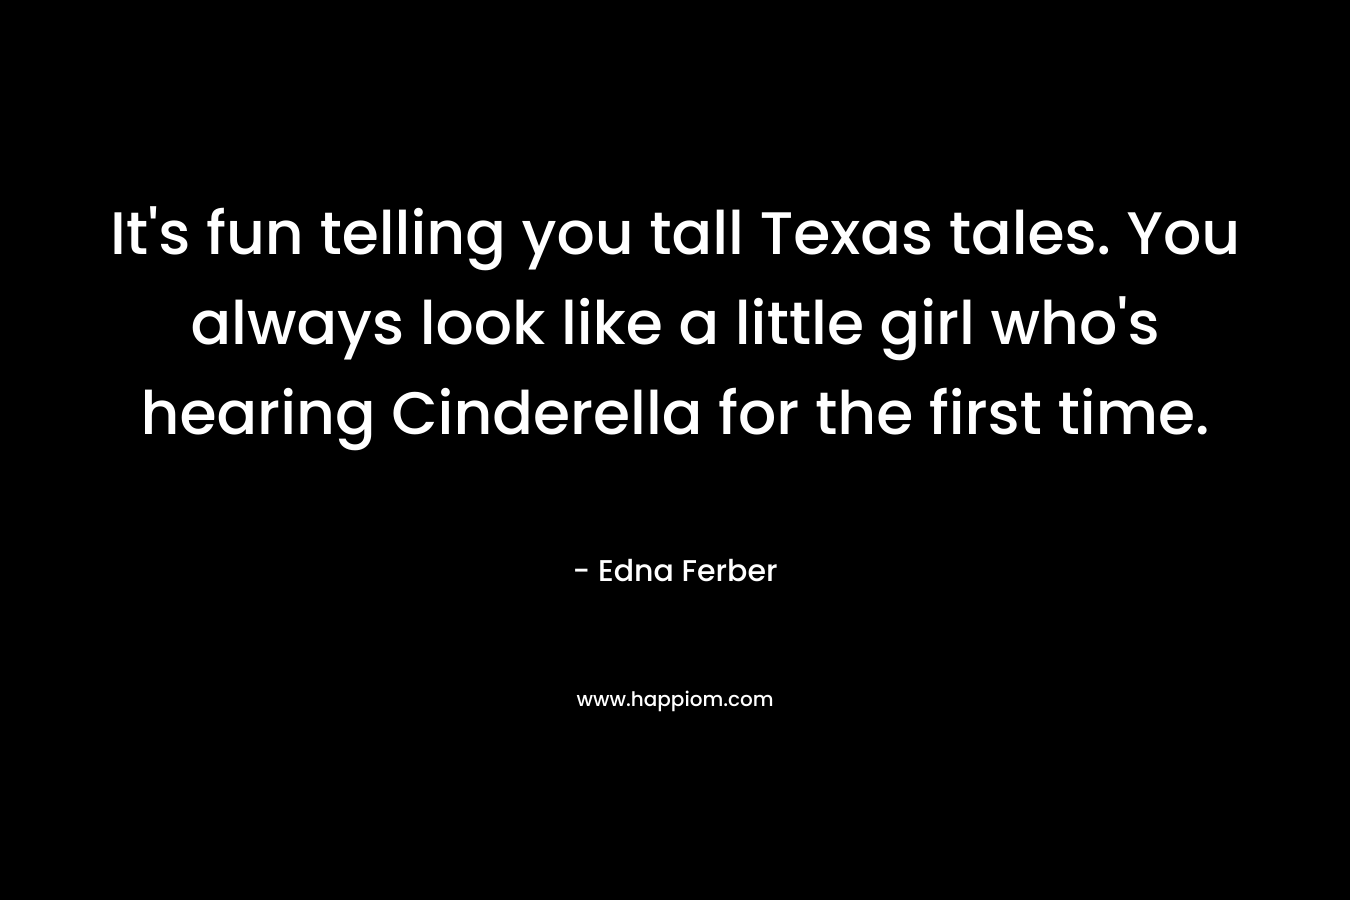 It’s fun telling you tall Texas tales. You always look like a little girl who’s hearing Cinderella for the first time. – Edna Ferber